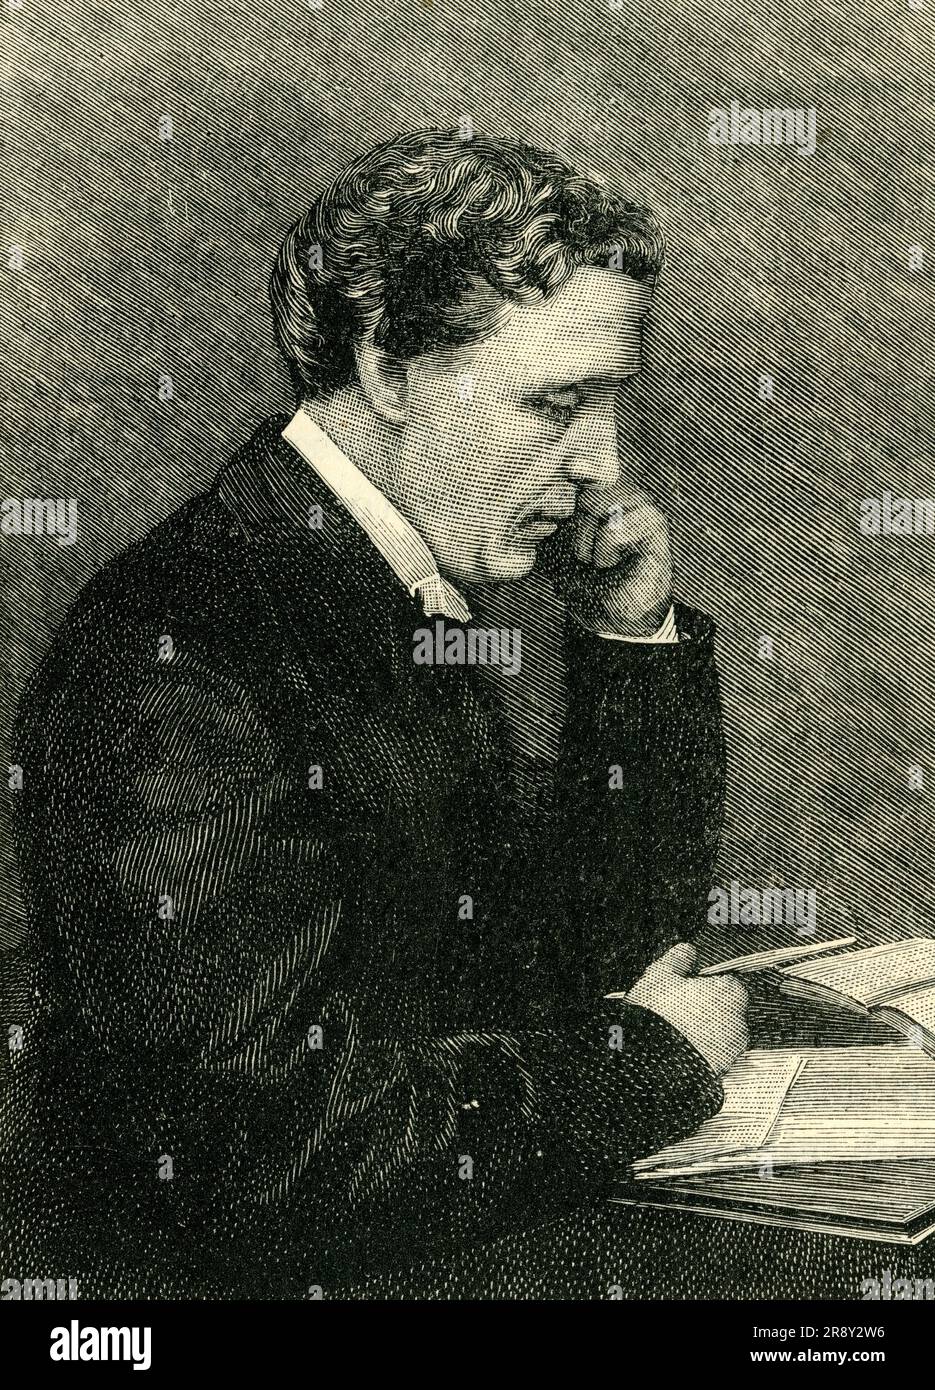 'Lewis Carroll', c1900. British author of &quot;Alice's Adventures in Wonderland&quot; and its sequel &quot;Alice Through the Looking-Glass&quot;. Engraving after a photograph. From &quot;Cassell's History of England, Vol. IX&quot;. [Cassell and Company, Limited, London, Paris, New York &amp; Melbourne] Stock Photo